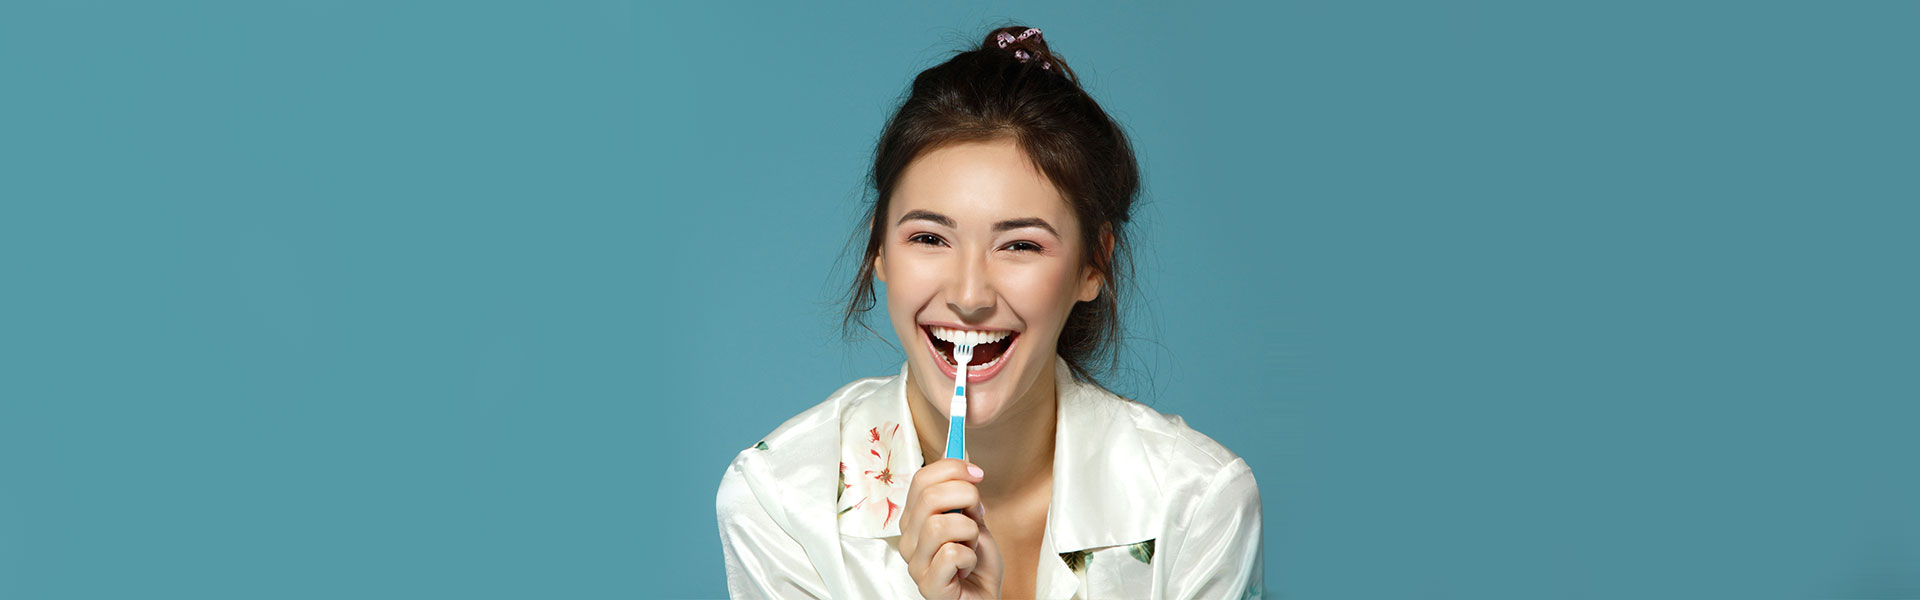 Improve Your Brushing and Flossing with These Tips